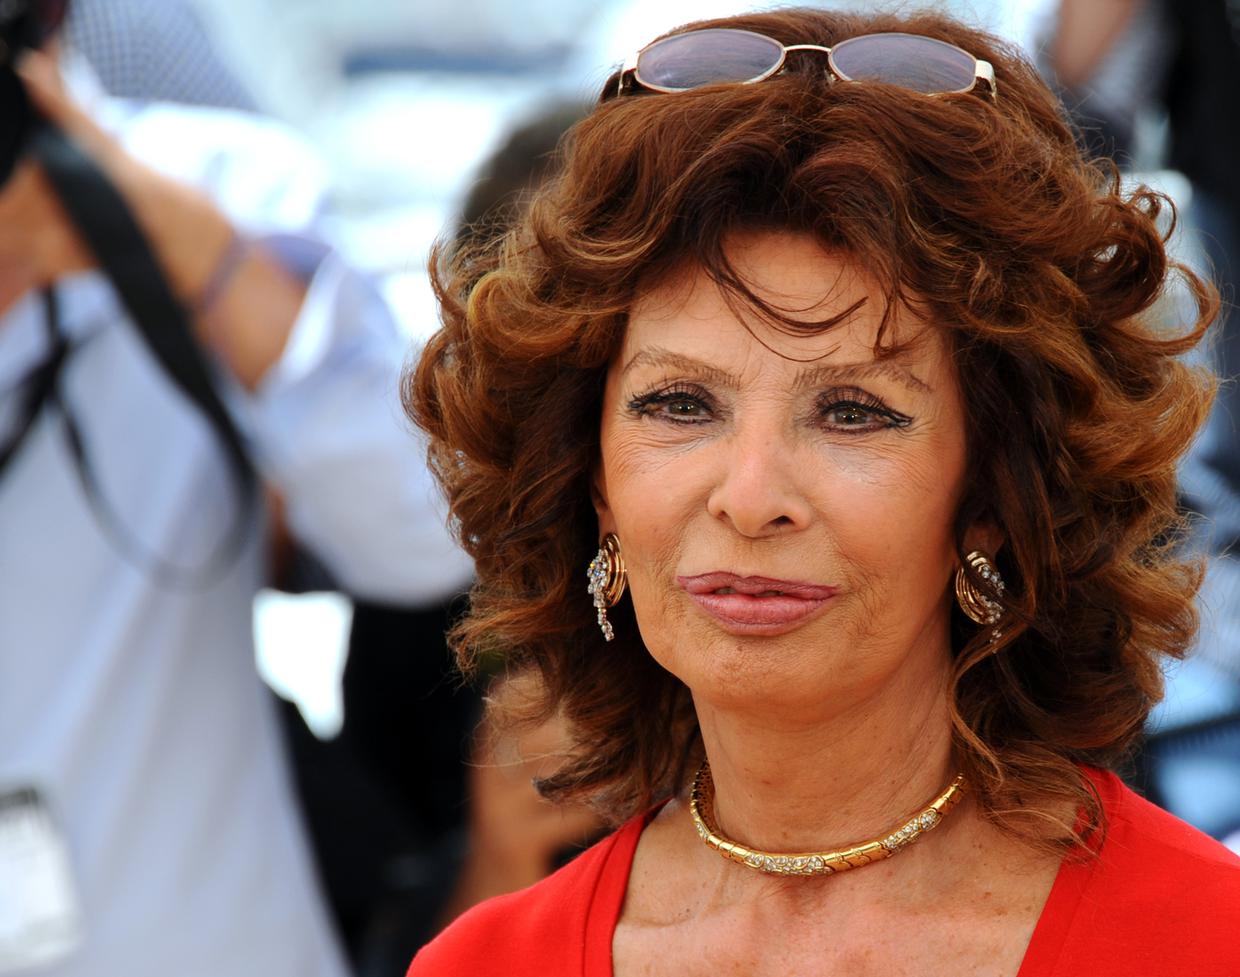 Sophia Loren attends a photocall to present Cannes Classics at the 67th Annual Cannes Film Festival | Source: Getty Images